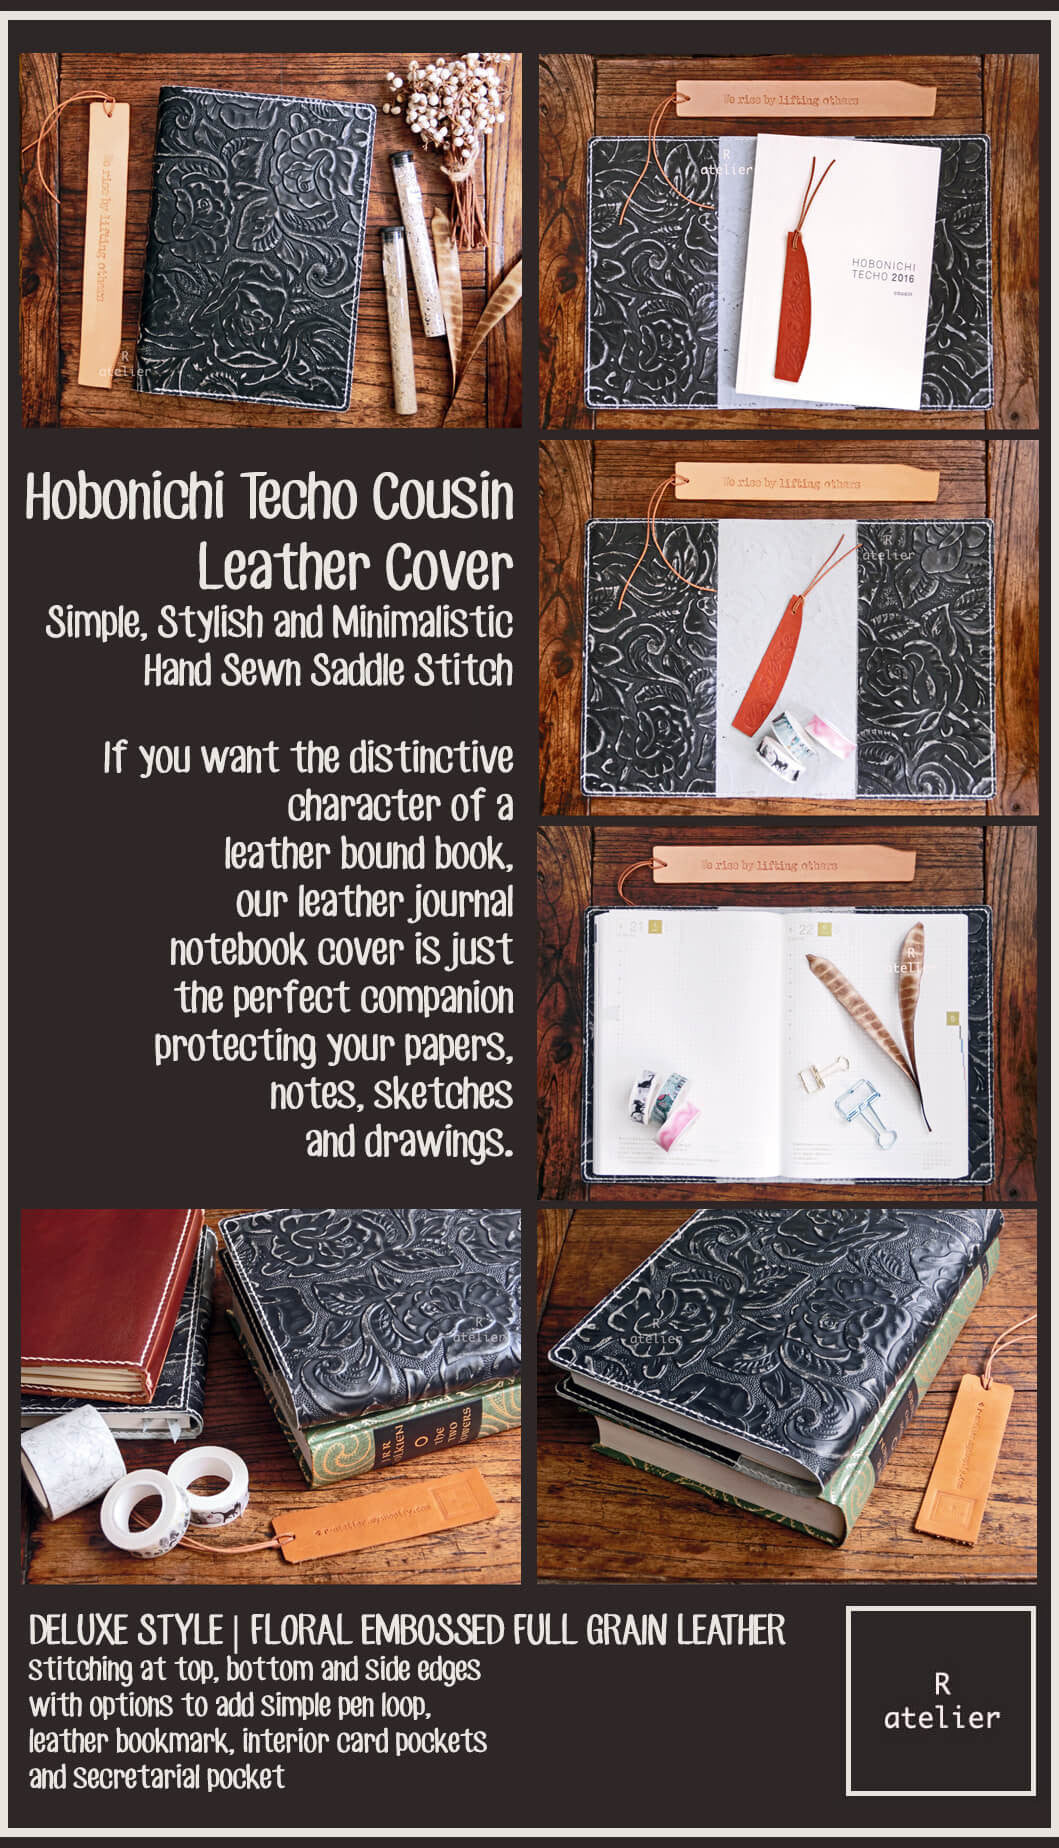 R.atelier Hobonichi Techo Cousin A5 Leather Journal Cover | Floral Embossed Black Onyx